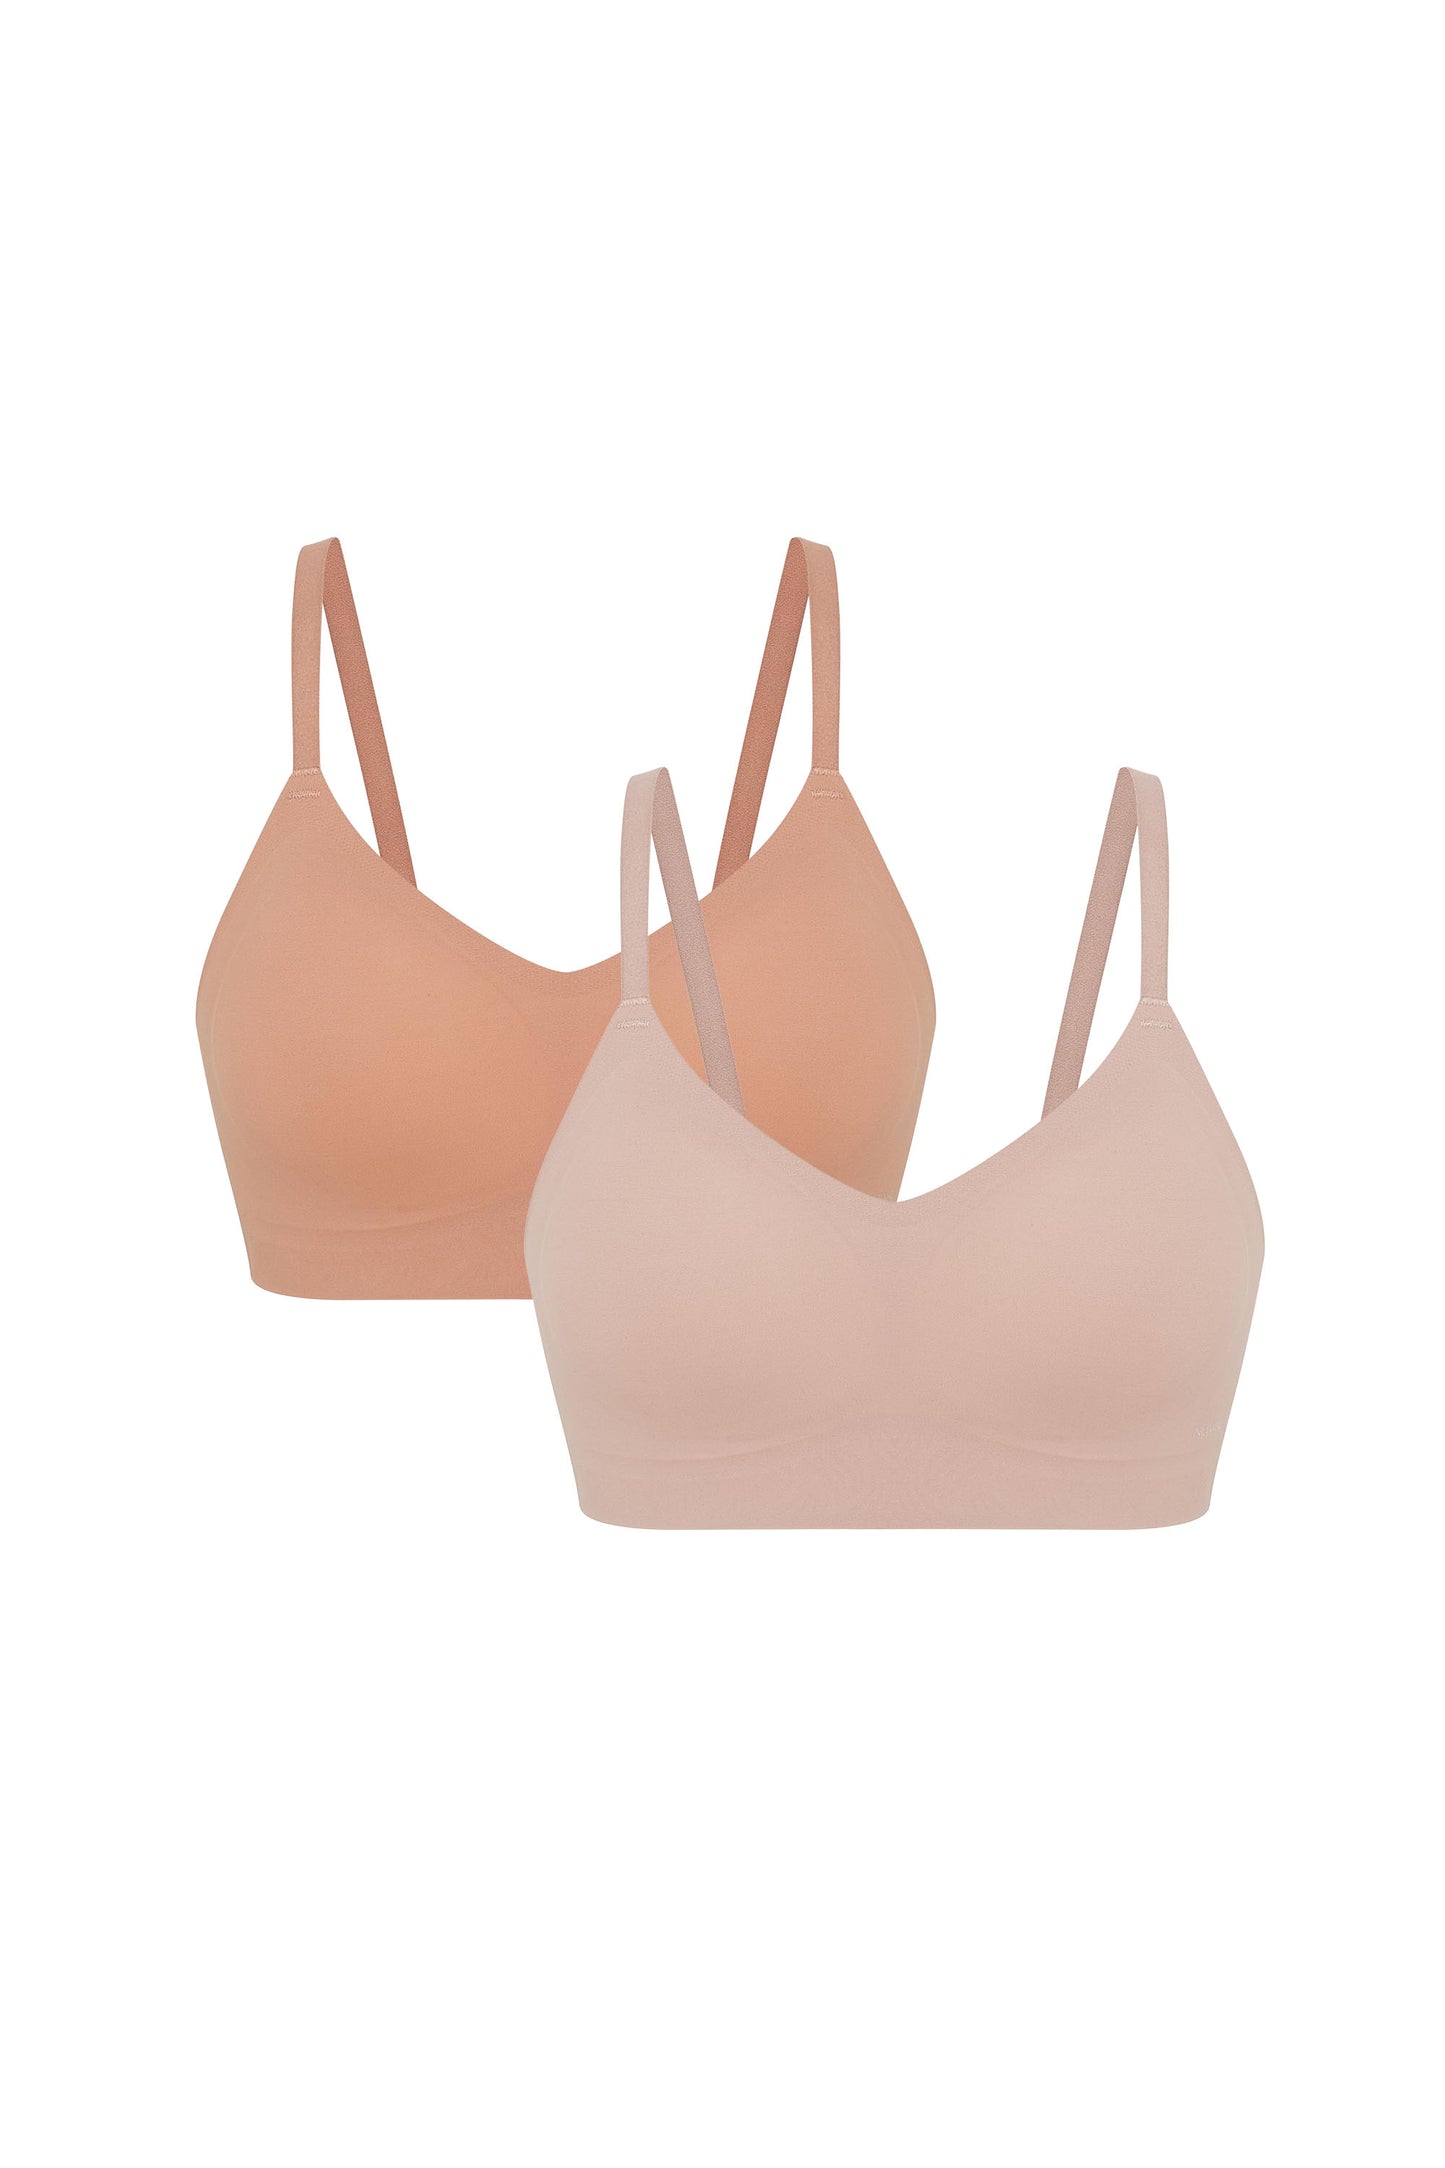 two bras, one in beige and one in tan